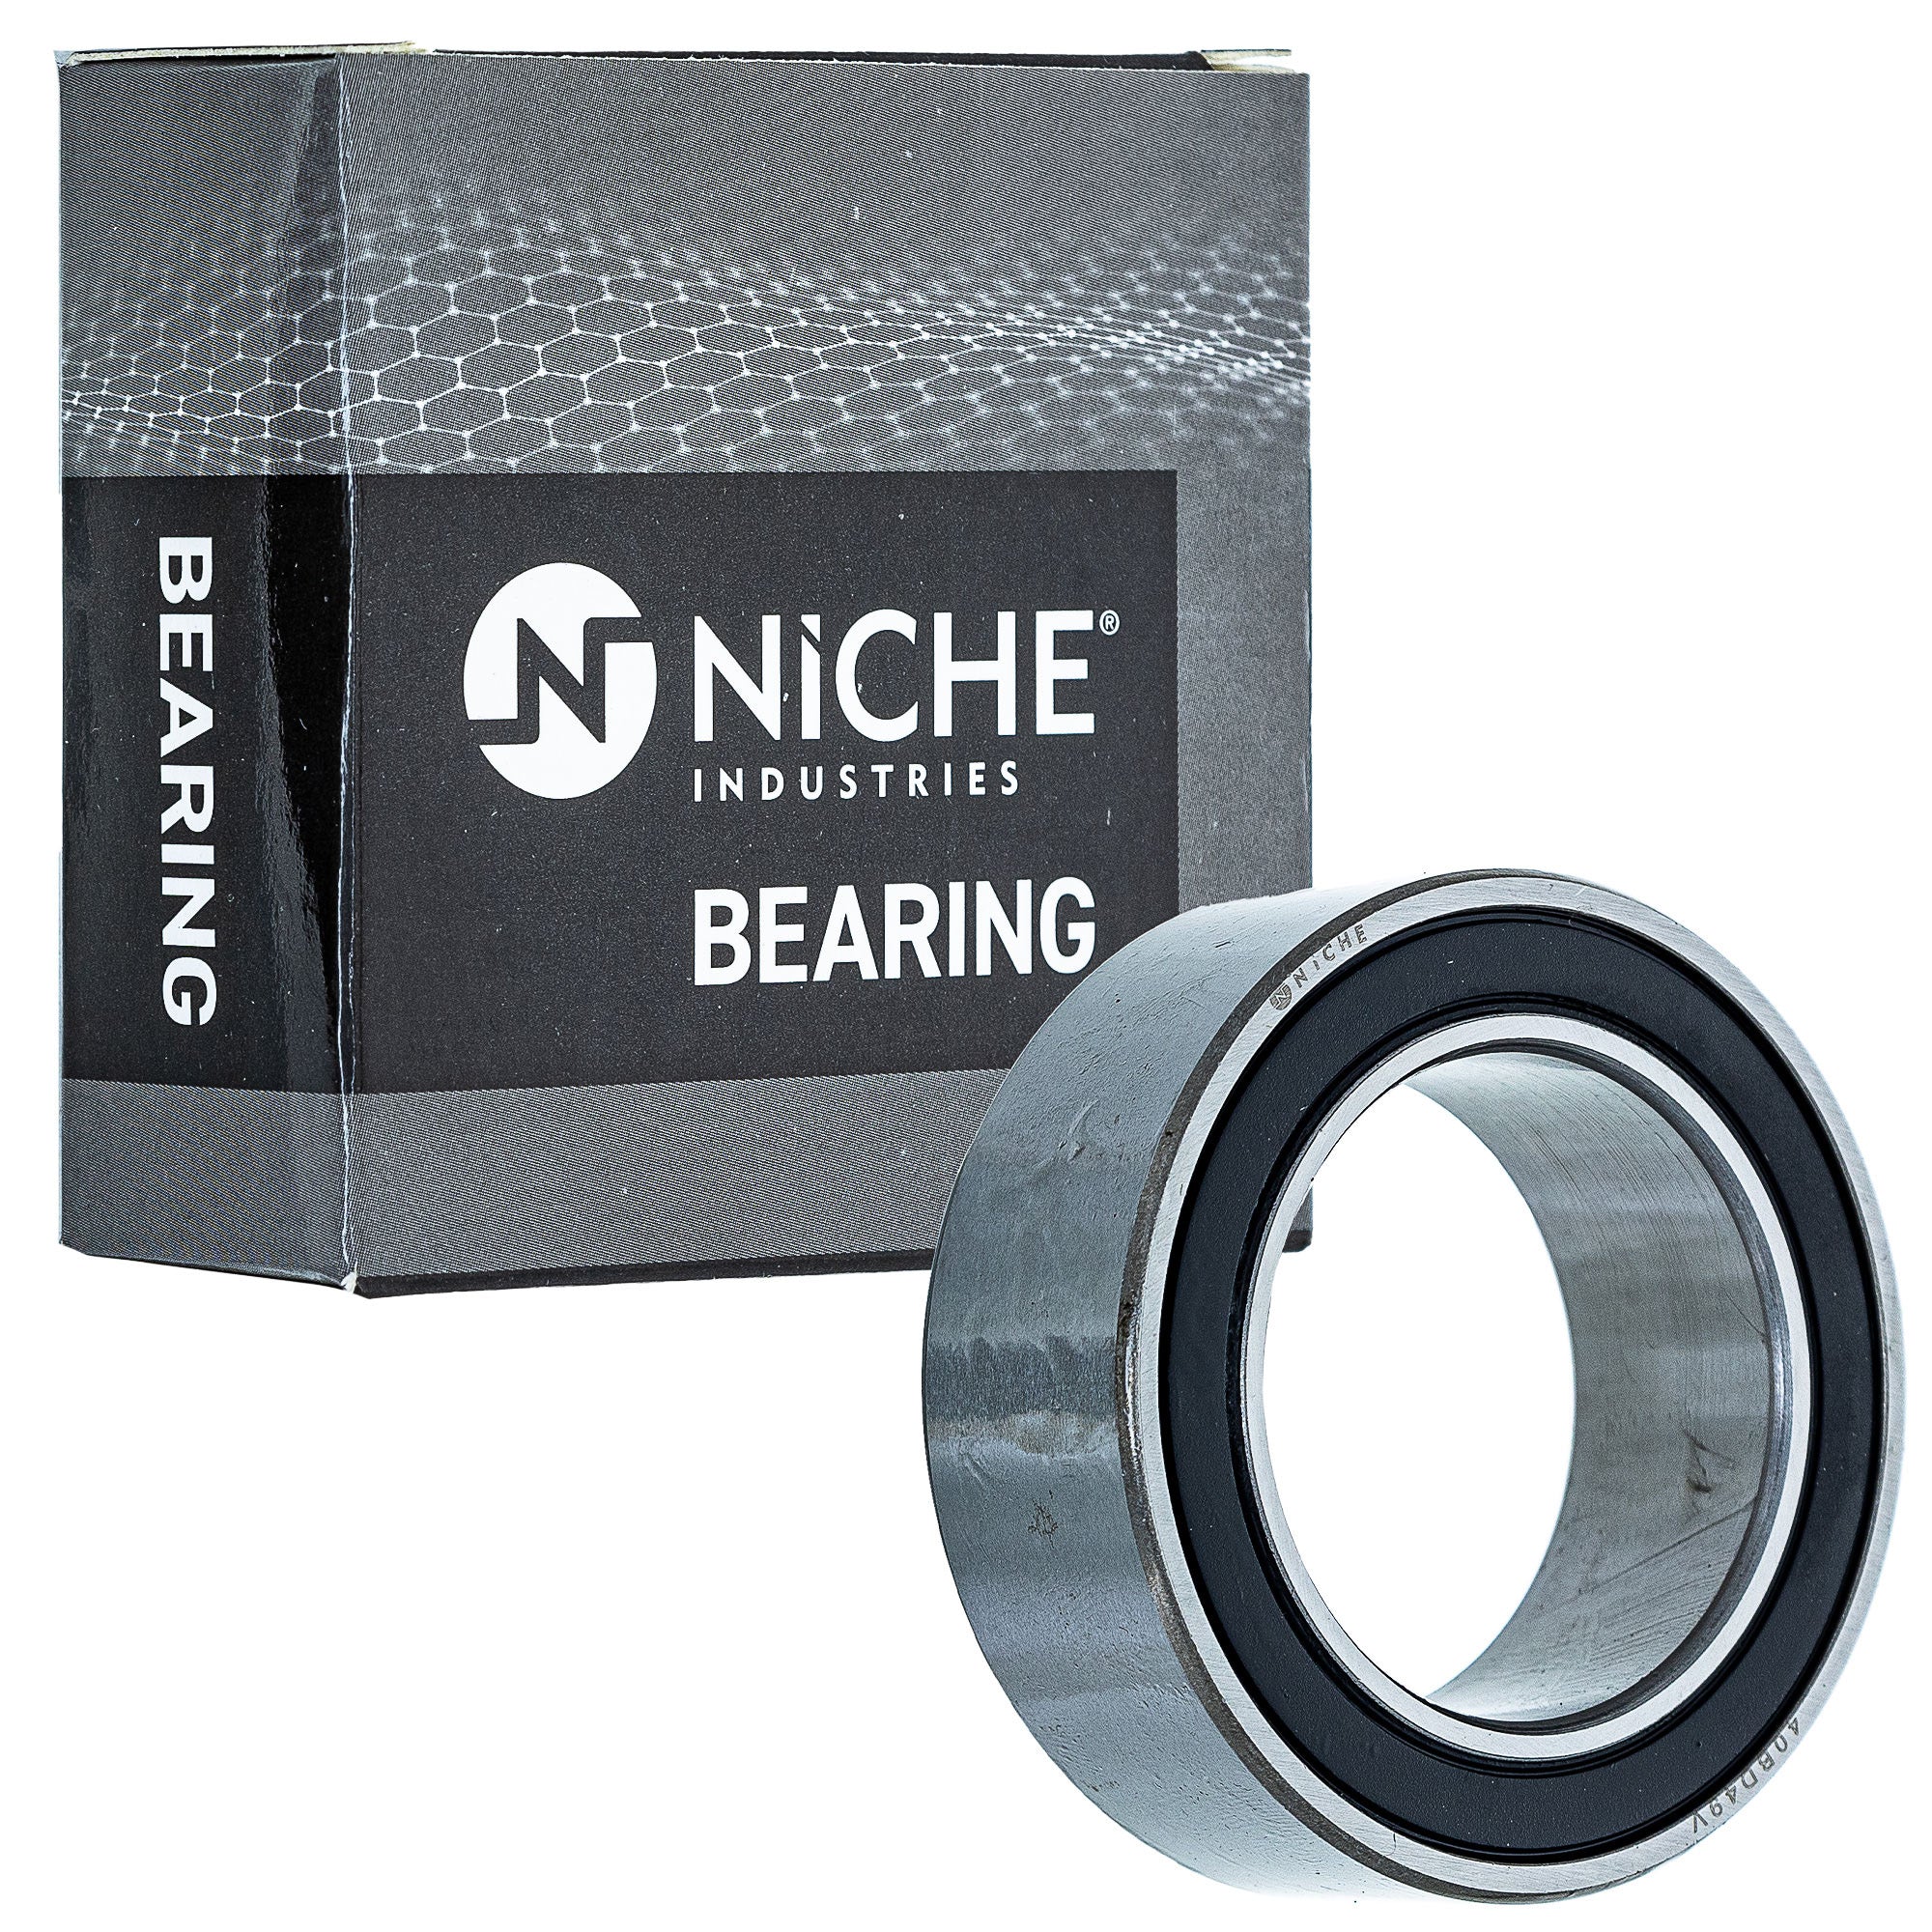 NICHE 519-CBB2202R Bearing 10-Pack for zOTHER DS450